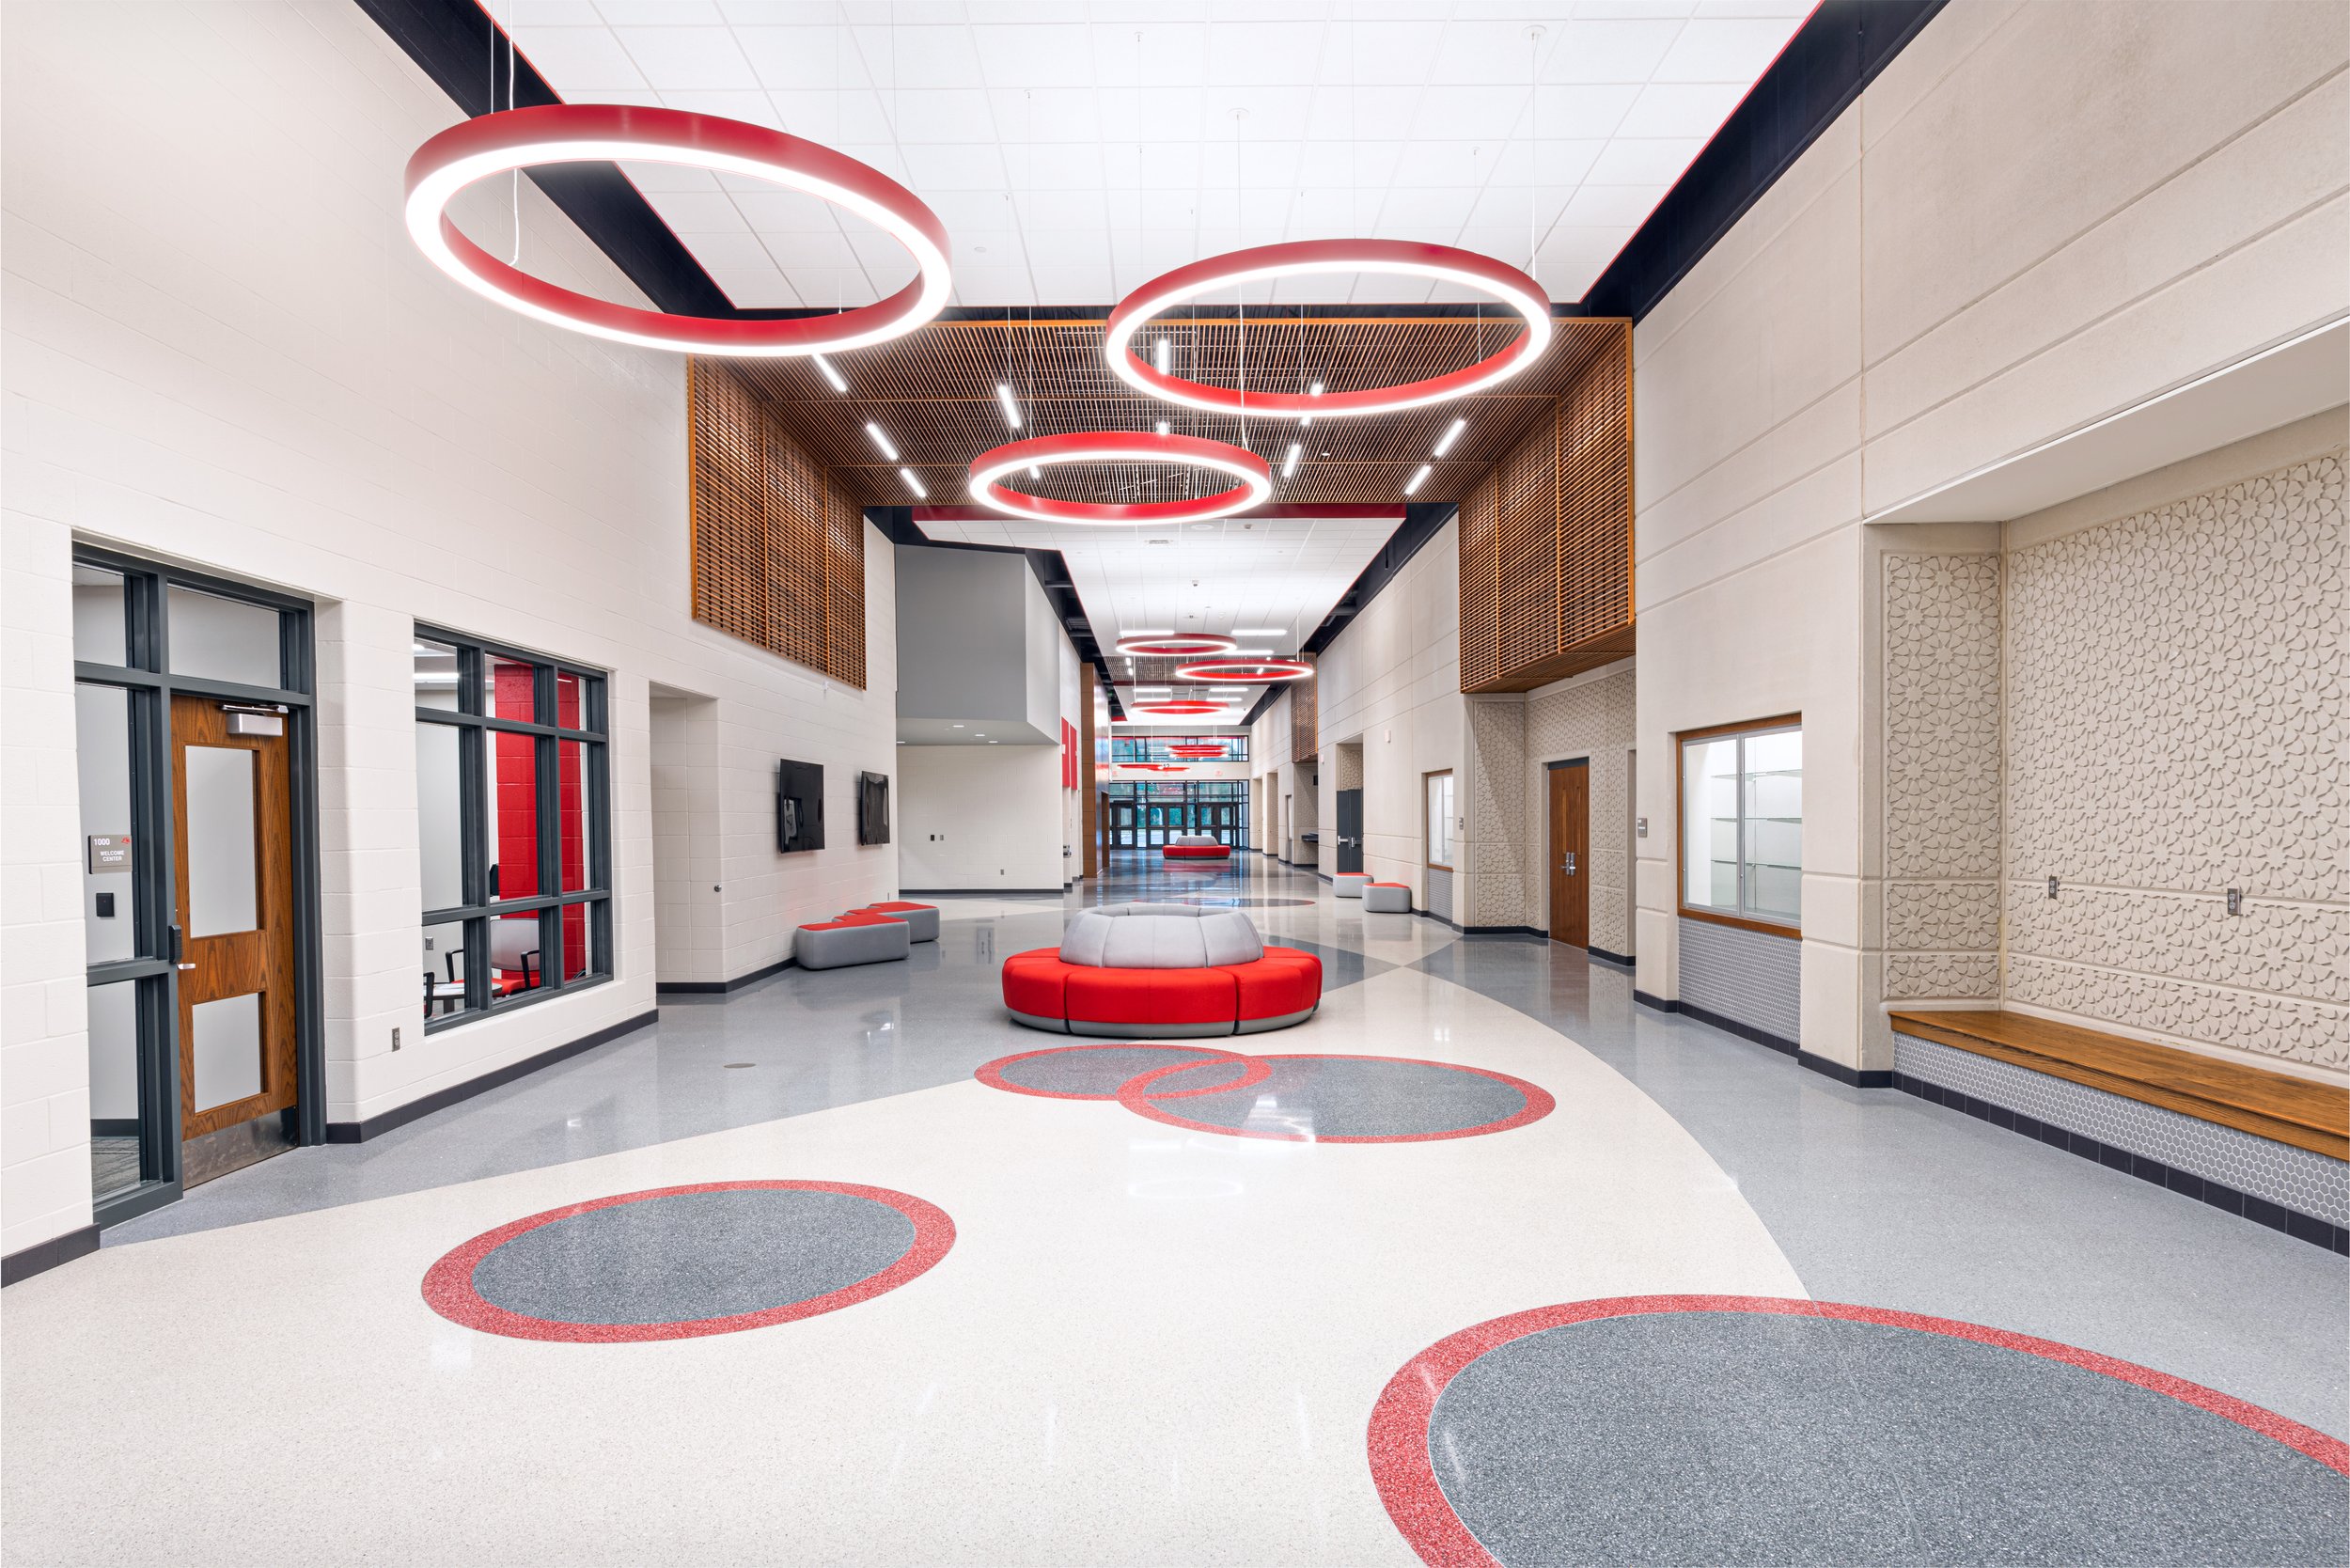 An aesthetic shot of a school building, taken by interior photographer Al Ensley.